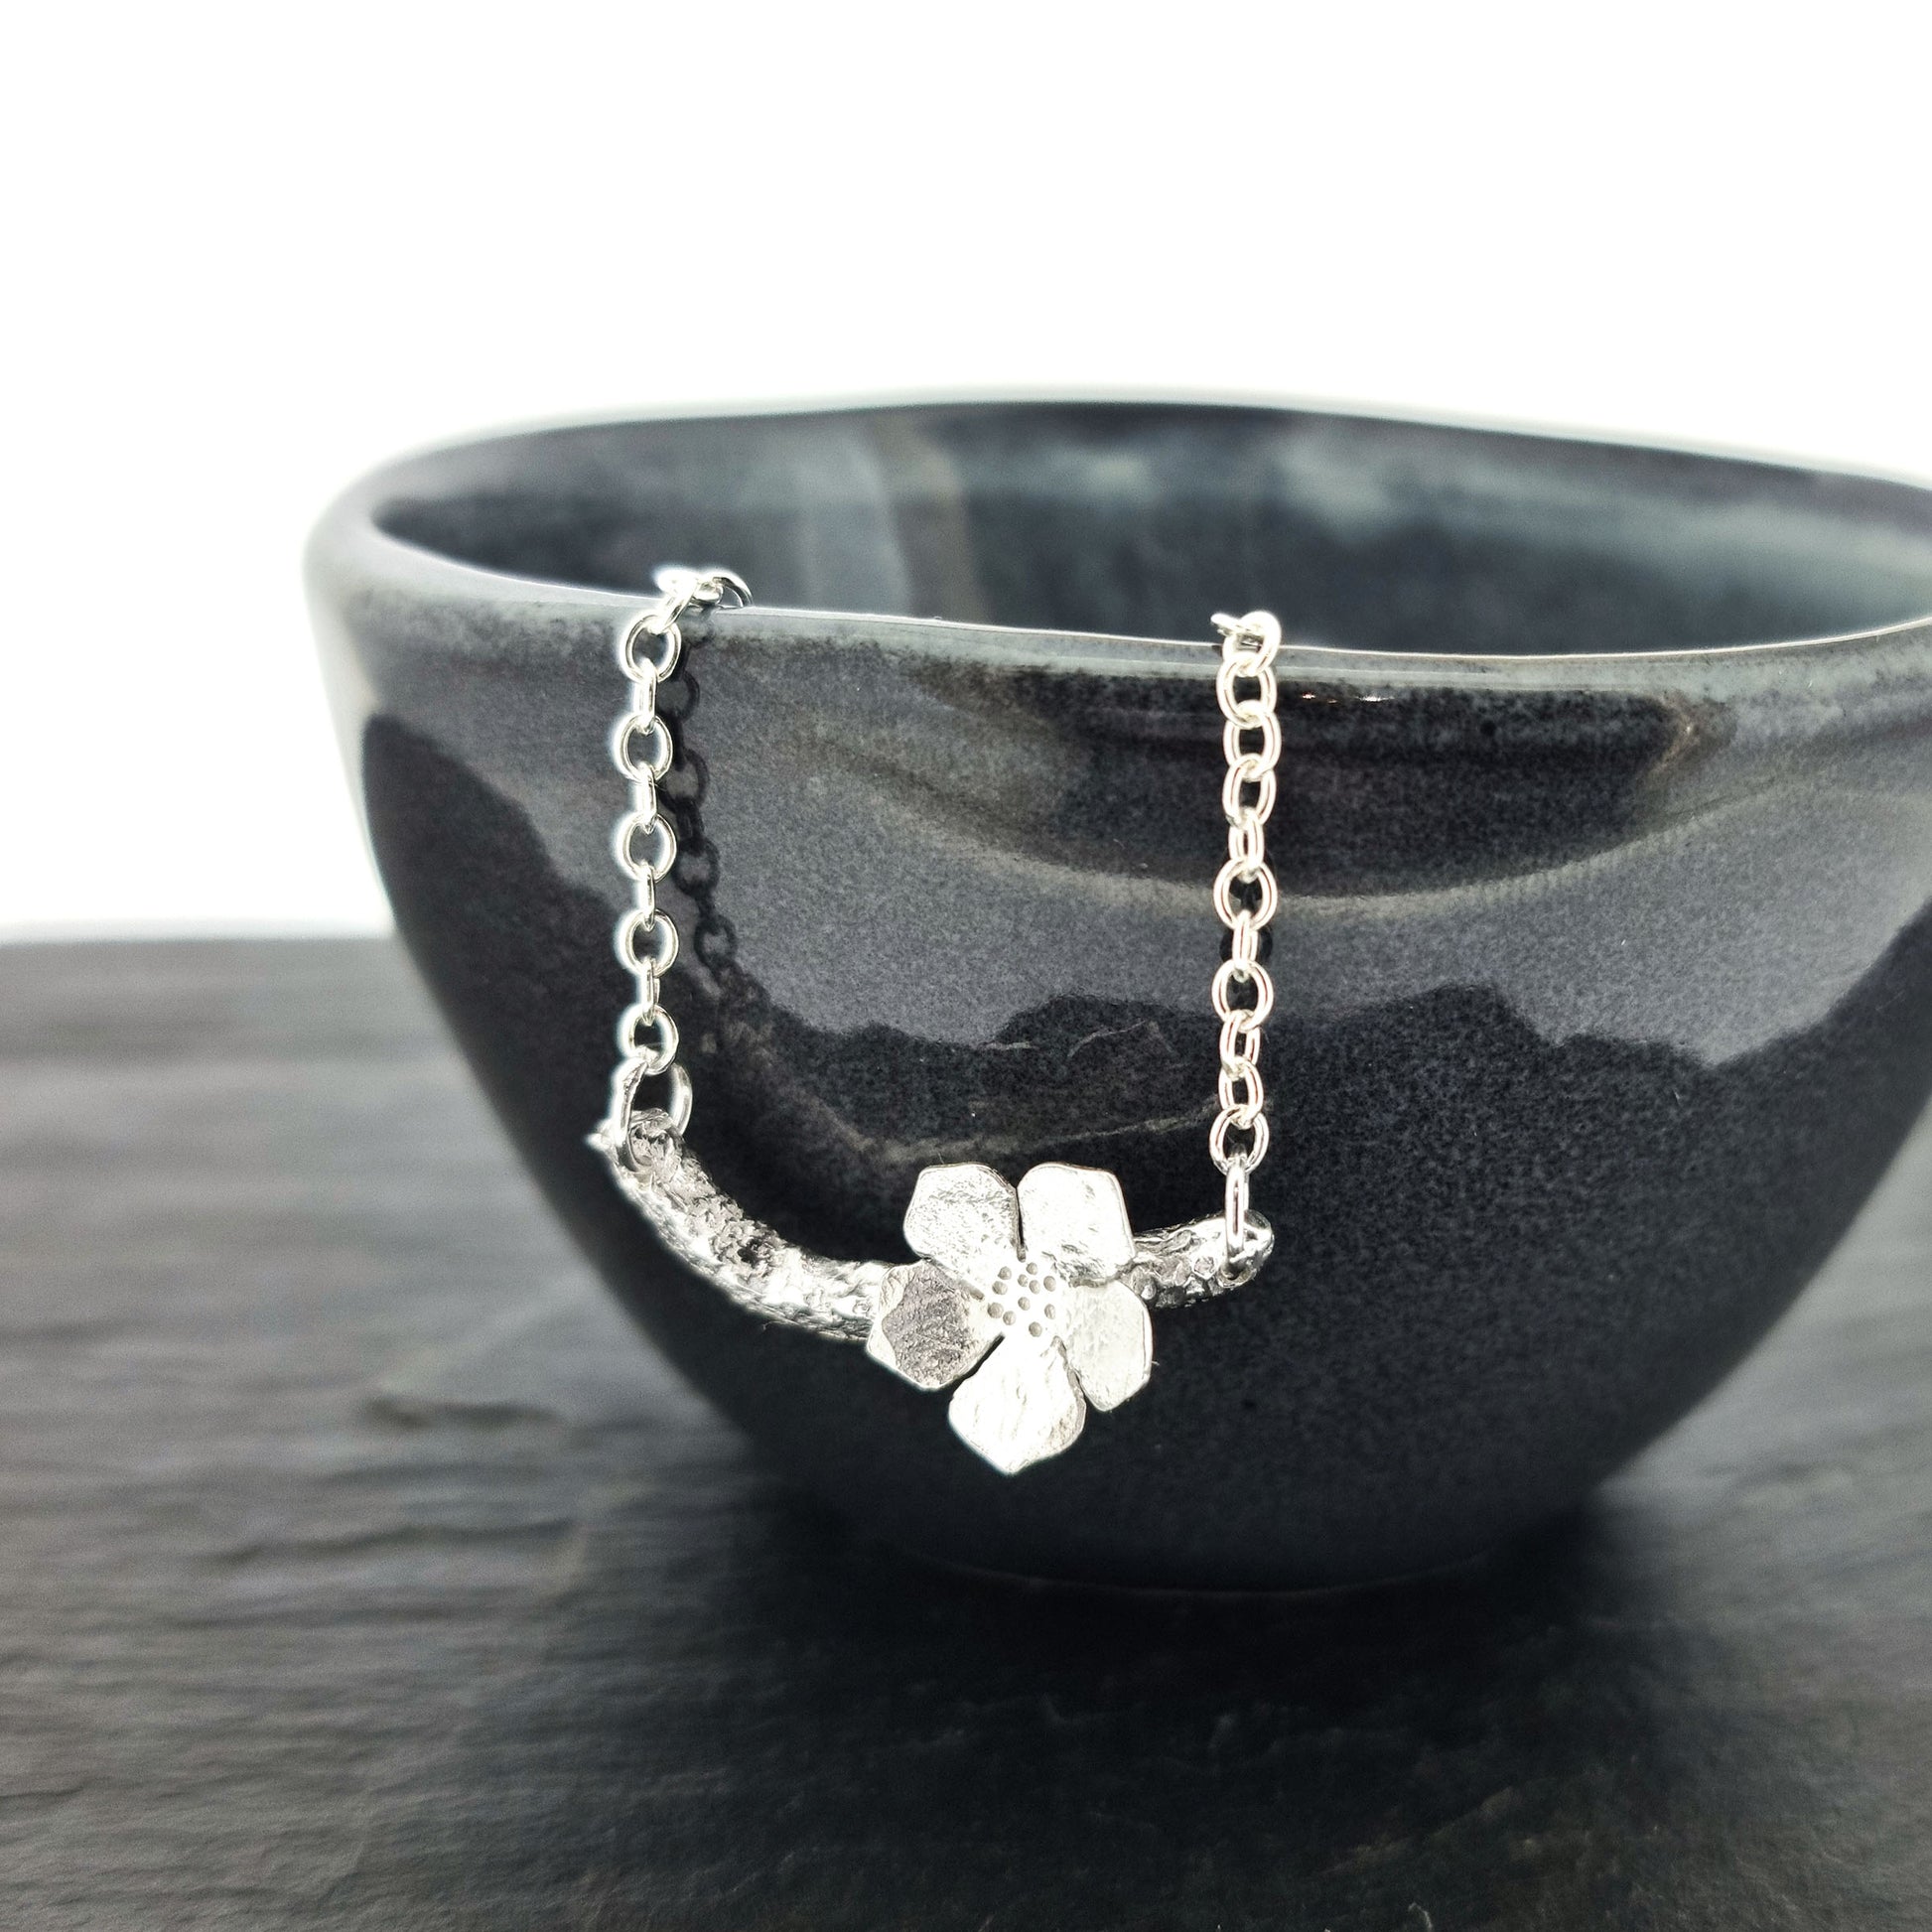 Silver necklace with small branch and a single 5 petal flower on it. Shown on a black bowl.